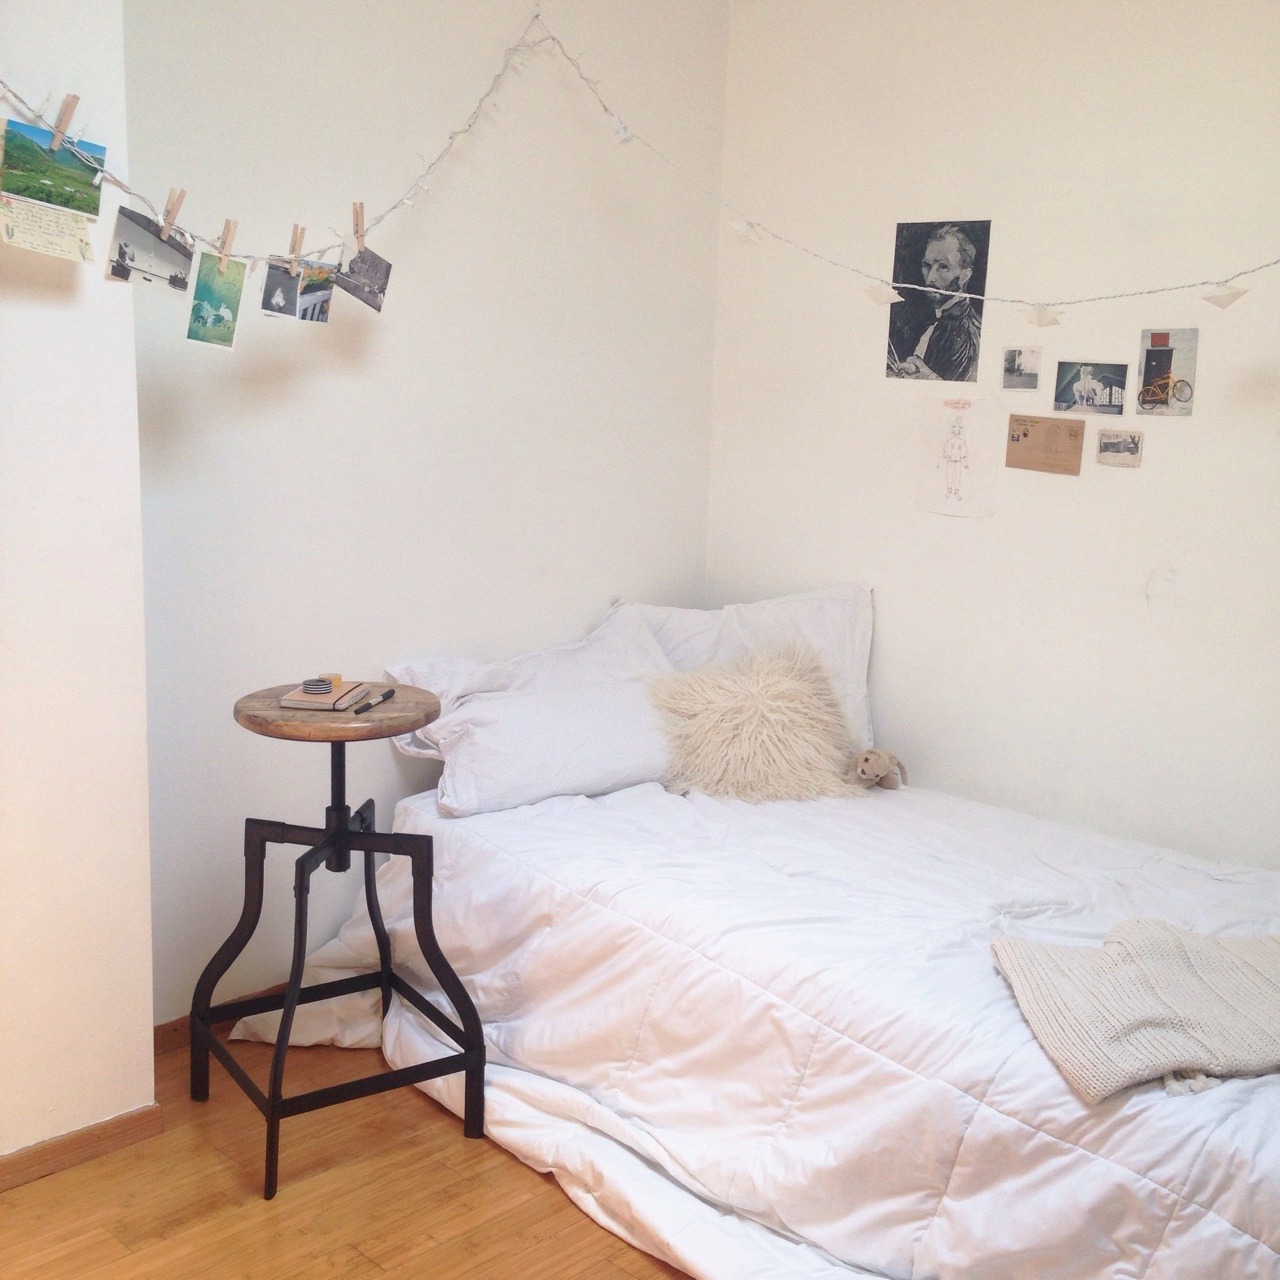 girlfig:  Here are some little snaps of my room! It’s very small and doesn’t